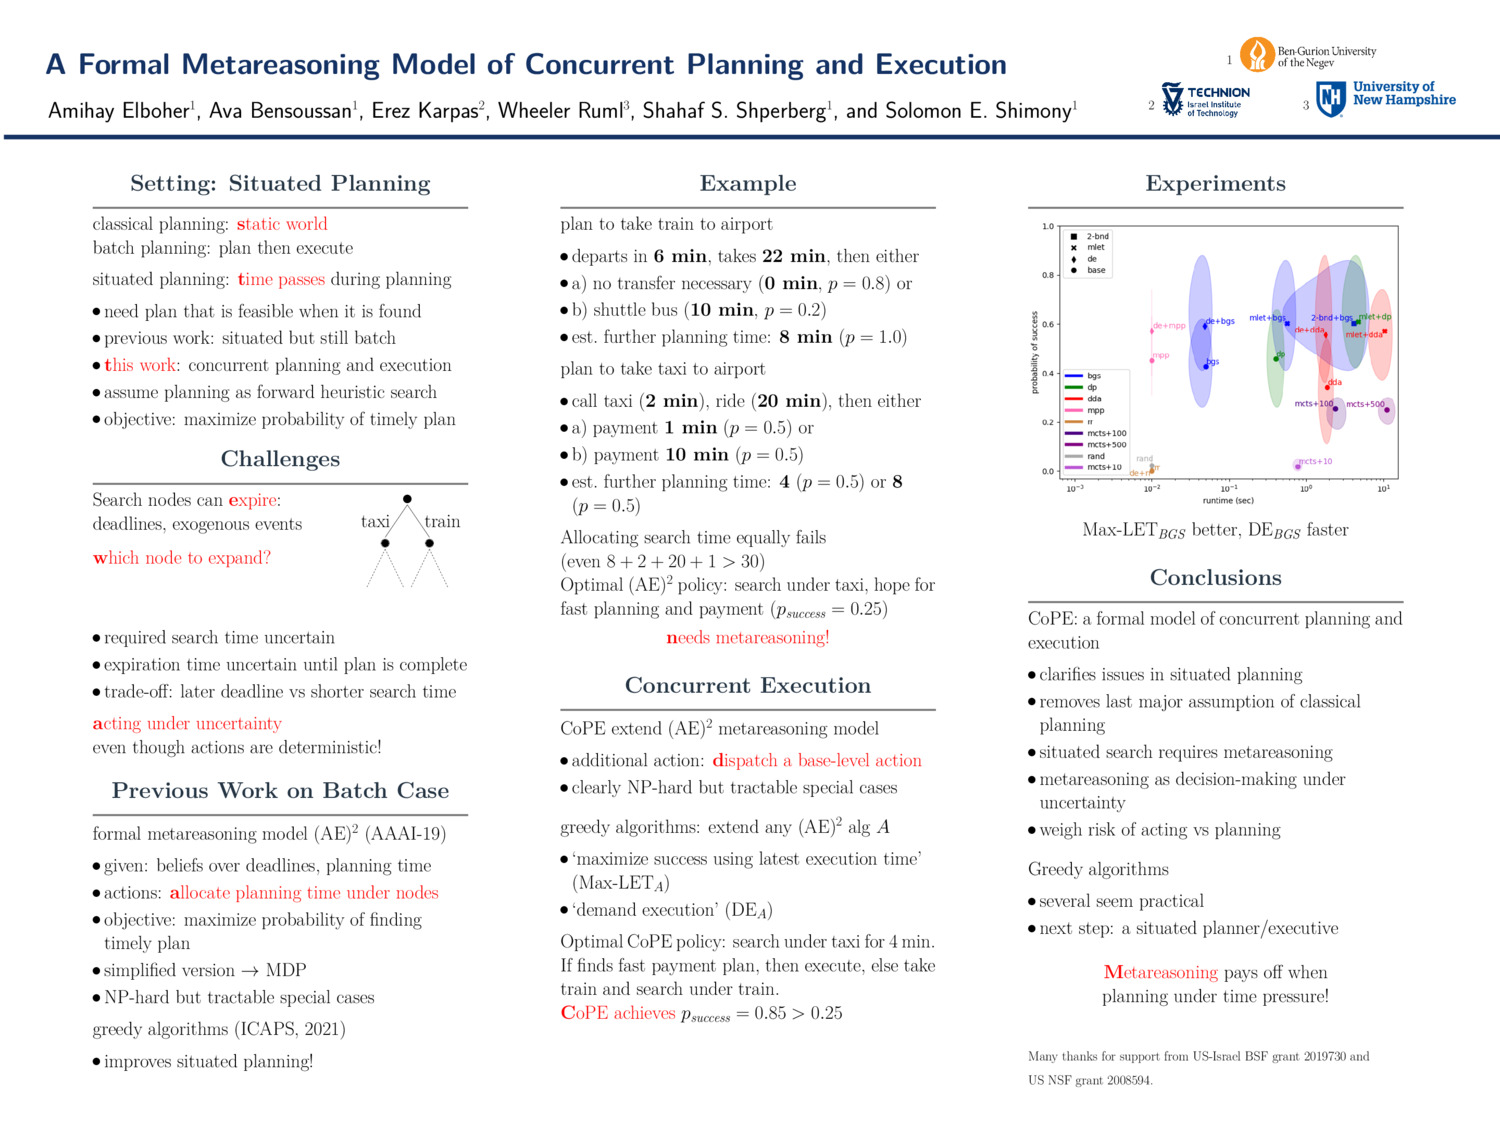 A Formal Metareasoning Model Of Concurrent Planning And Execution by ruml